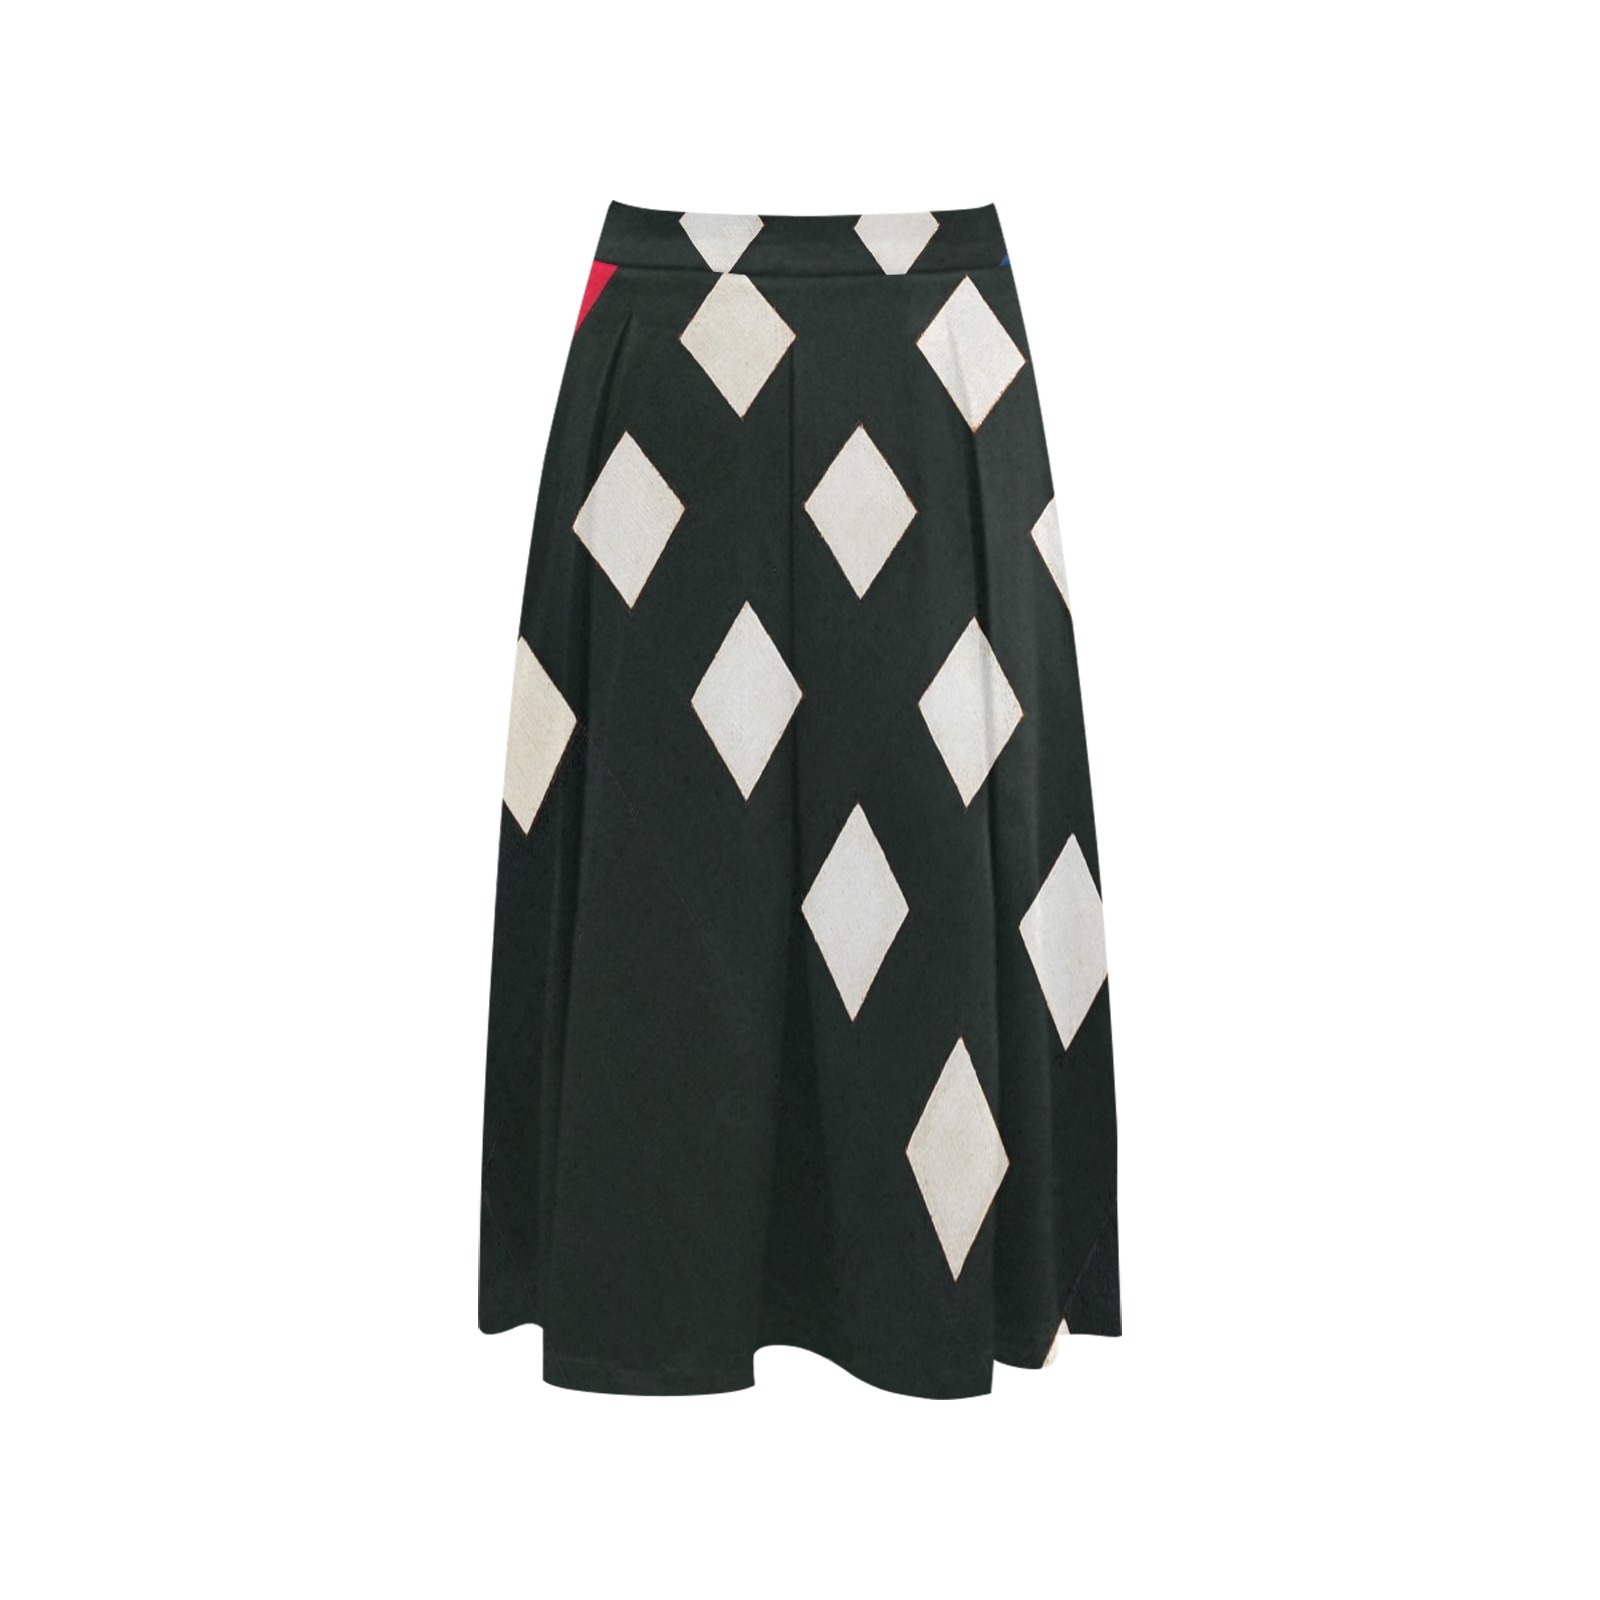 Counter-composition XV by Theo van Doesburg- Mnemosyne Women's Crepe Skirt (Model D16)